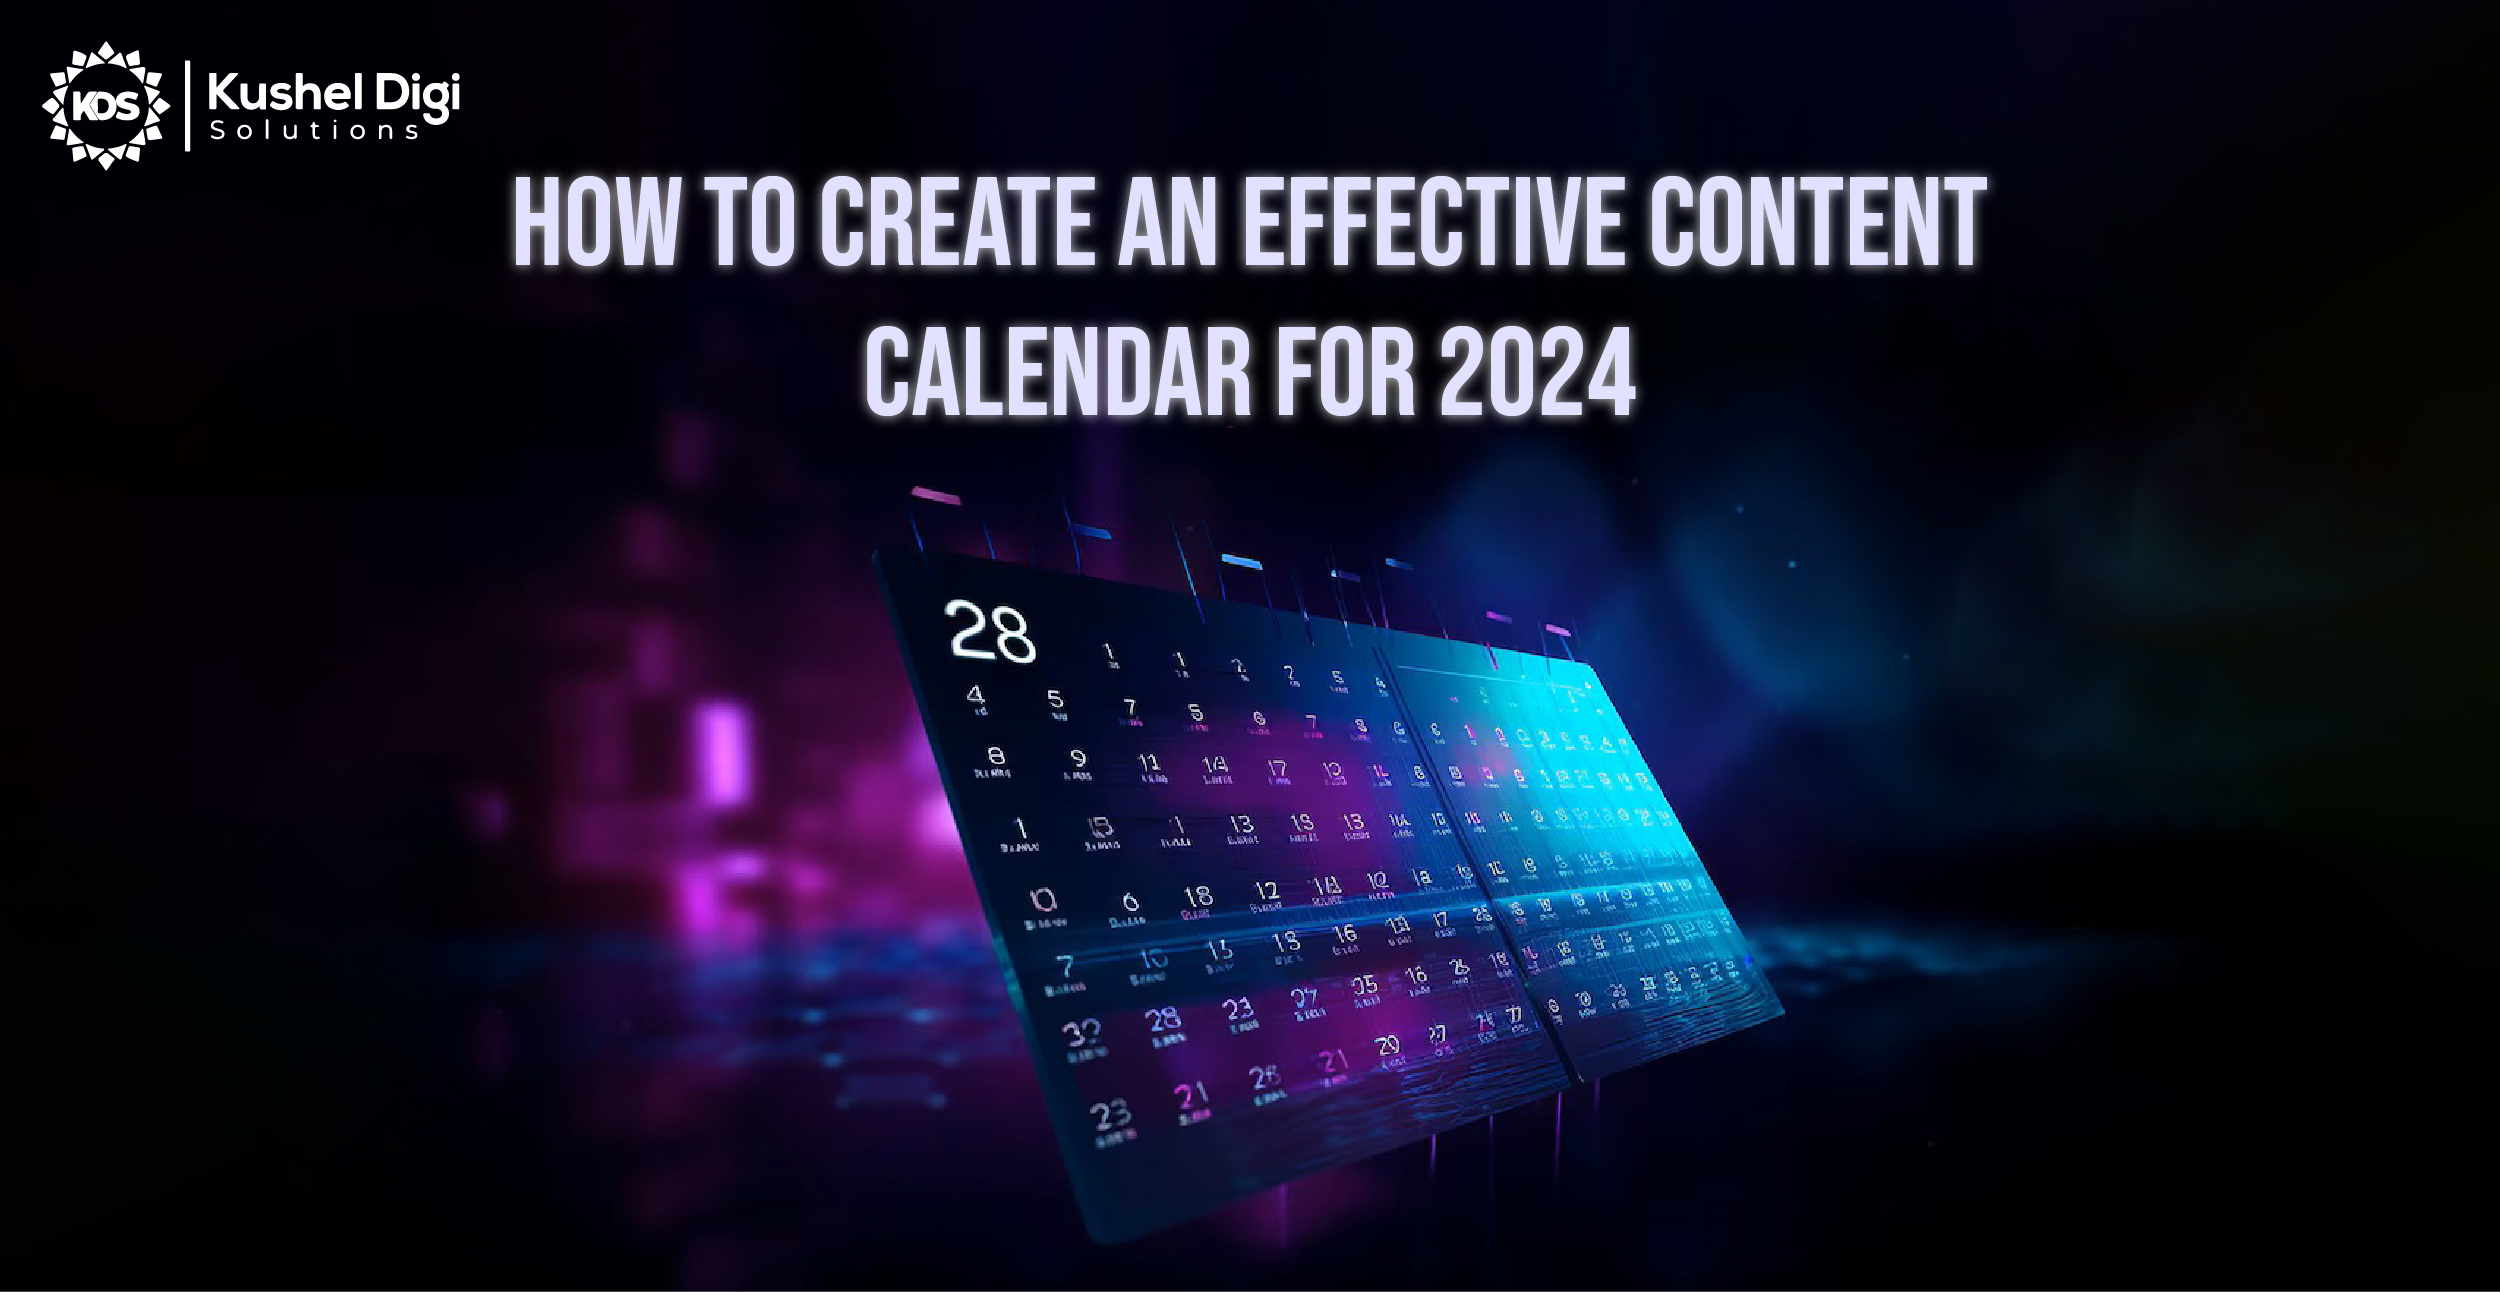 HOW TO CREATE AN EFFECTIVE CONTENT CALENDAR FOR 2024